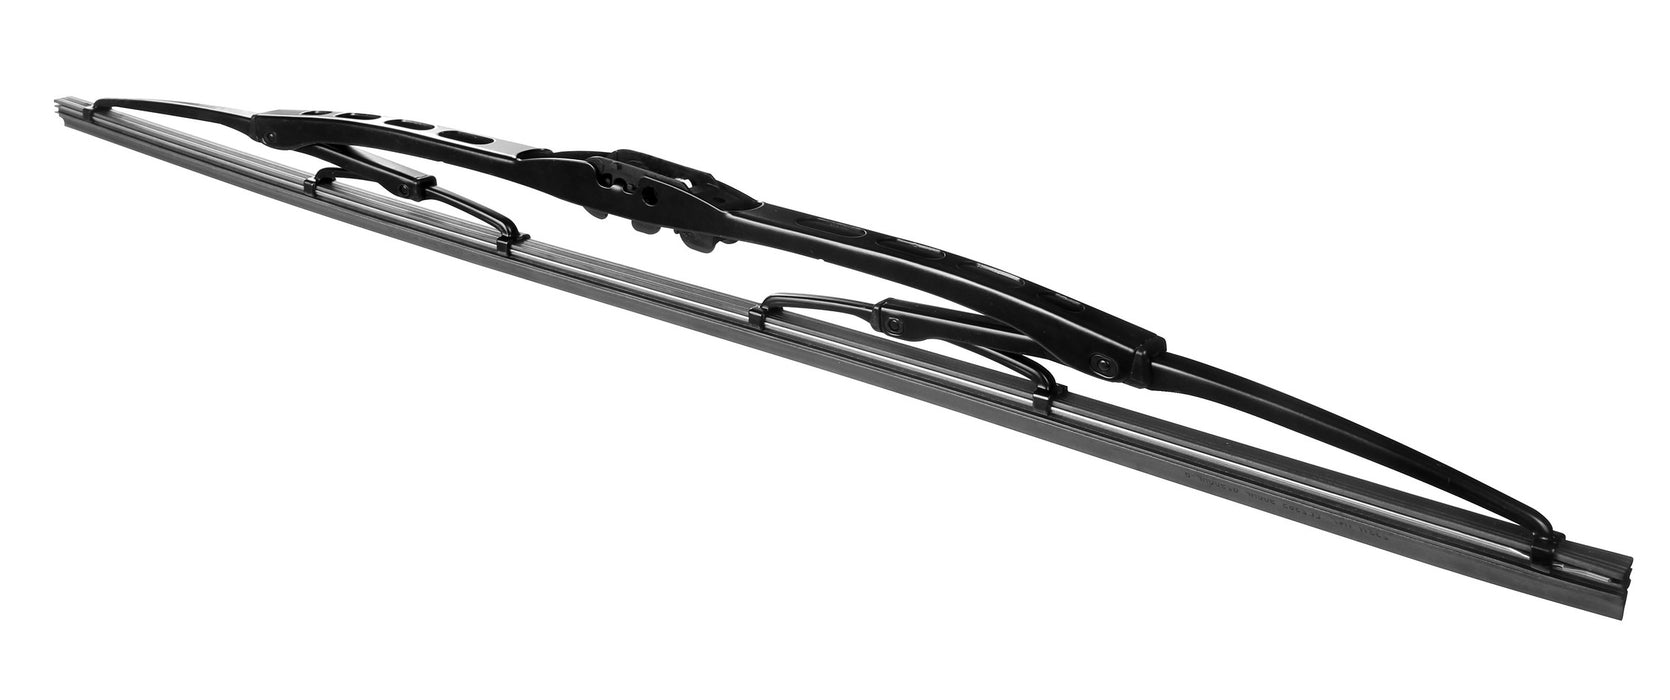 Land Rover Discovery Mk3 2004-2009 Xtremeauto® Rear Window Windscreen Replacement Wiper Blades